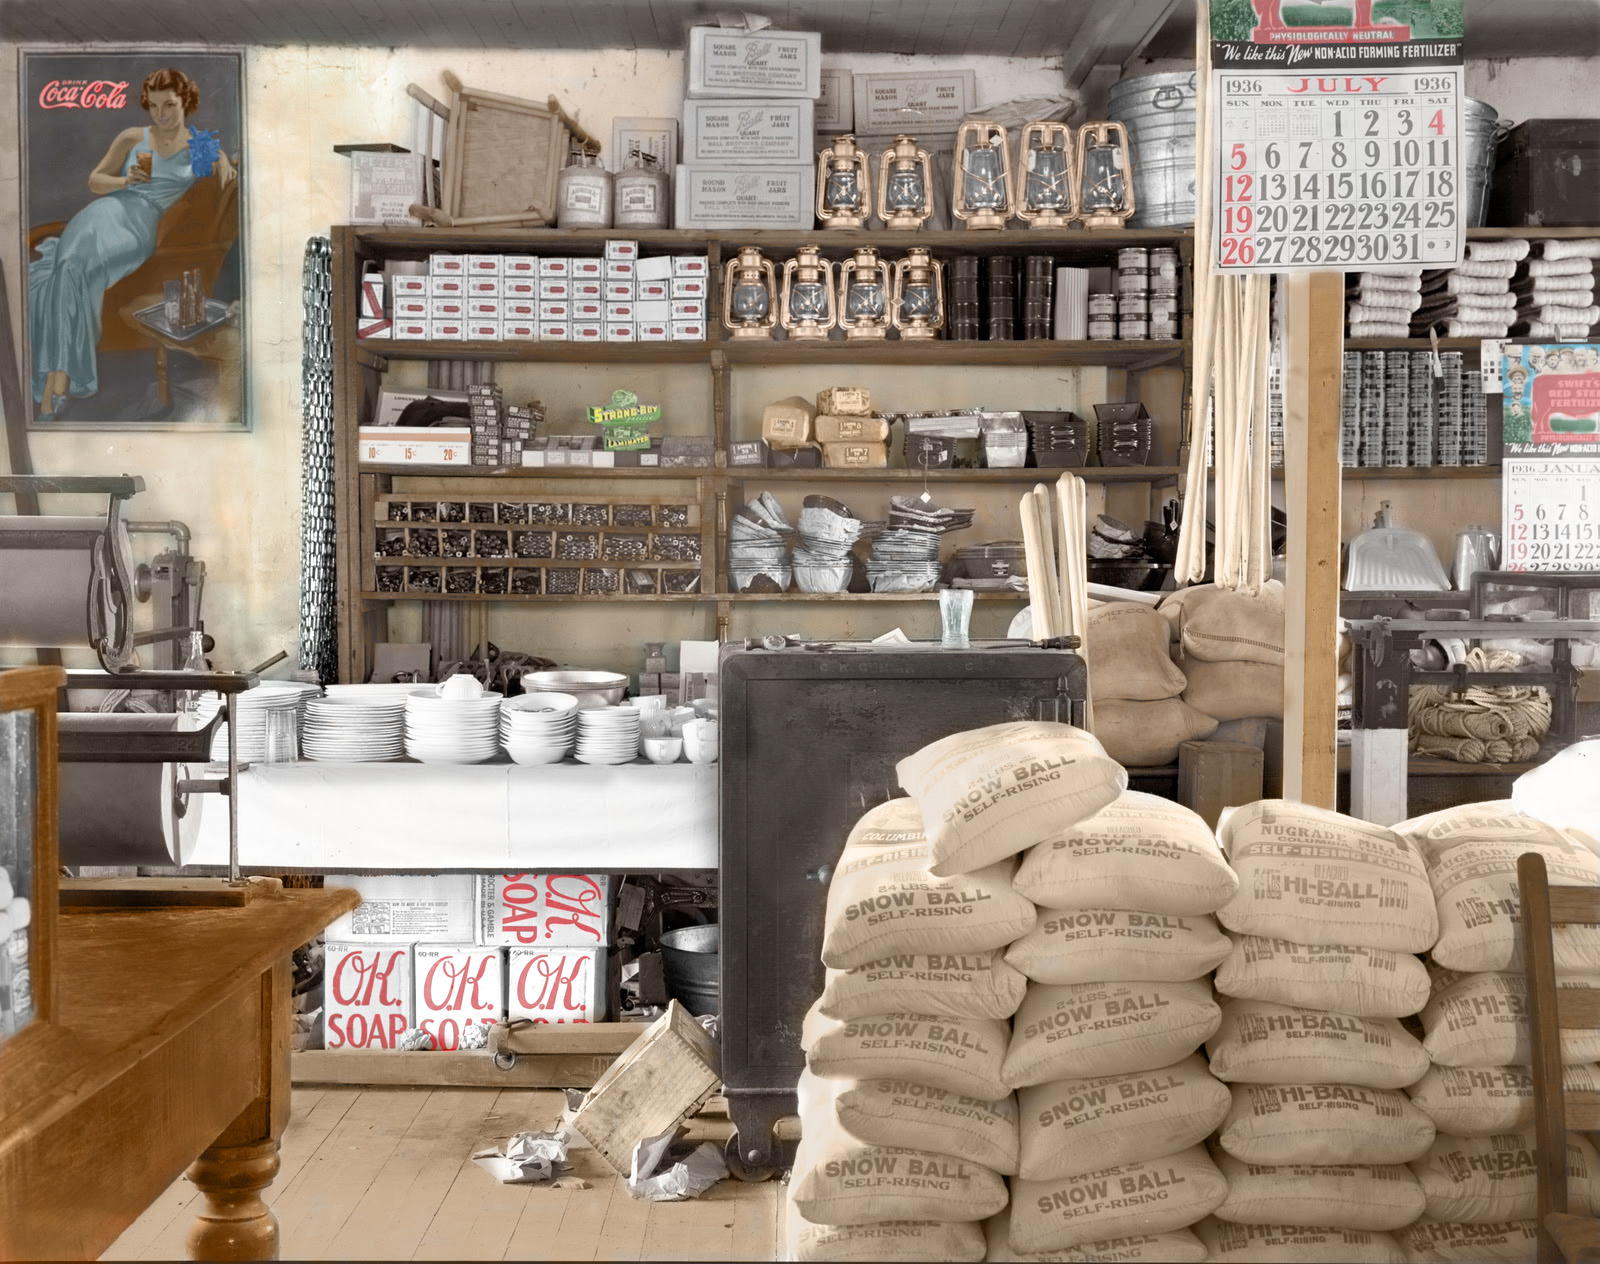 Colorized version of photo that originally appeared on Shorpy. Colorized by Andrew Kelly. View full size.